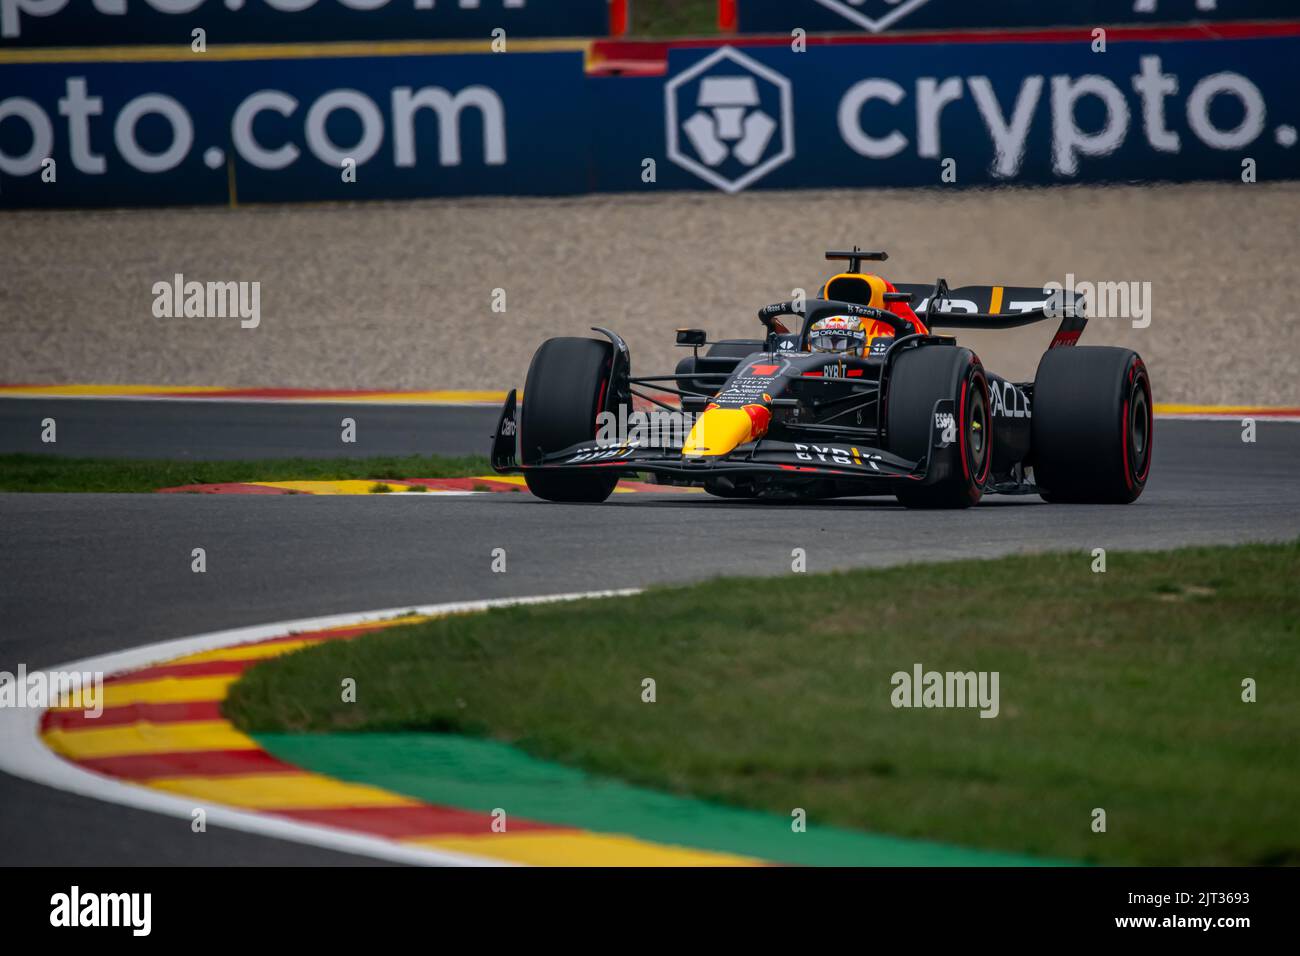 Stavelot, Belgium, 27th Aug 2022, Max Verstappen, from Netherlands competes for Red Bull Racing. Qualifying, round 14 of the 2022 Formula 1 championship. Credit: Michael Potts/Alamy Live News Stock Photo